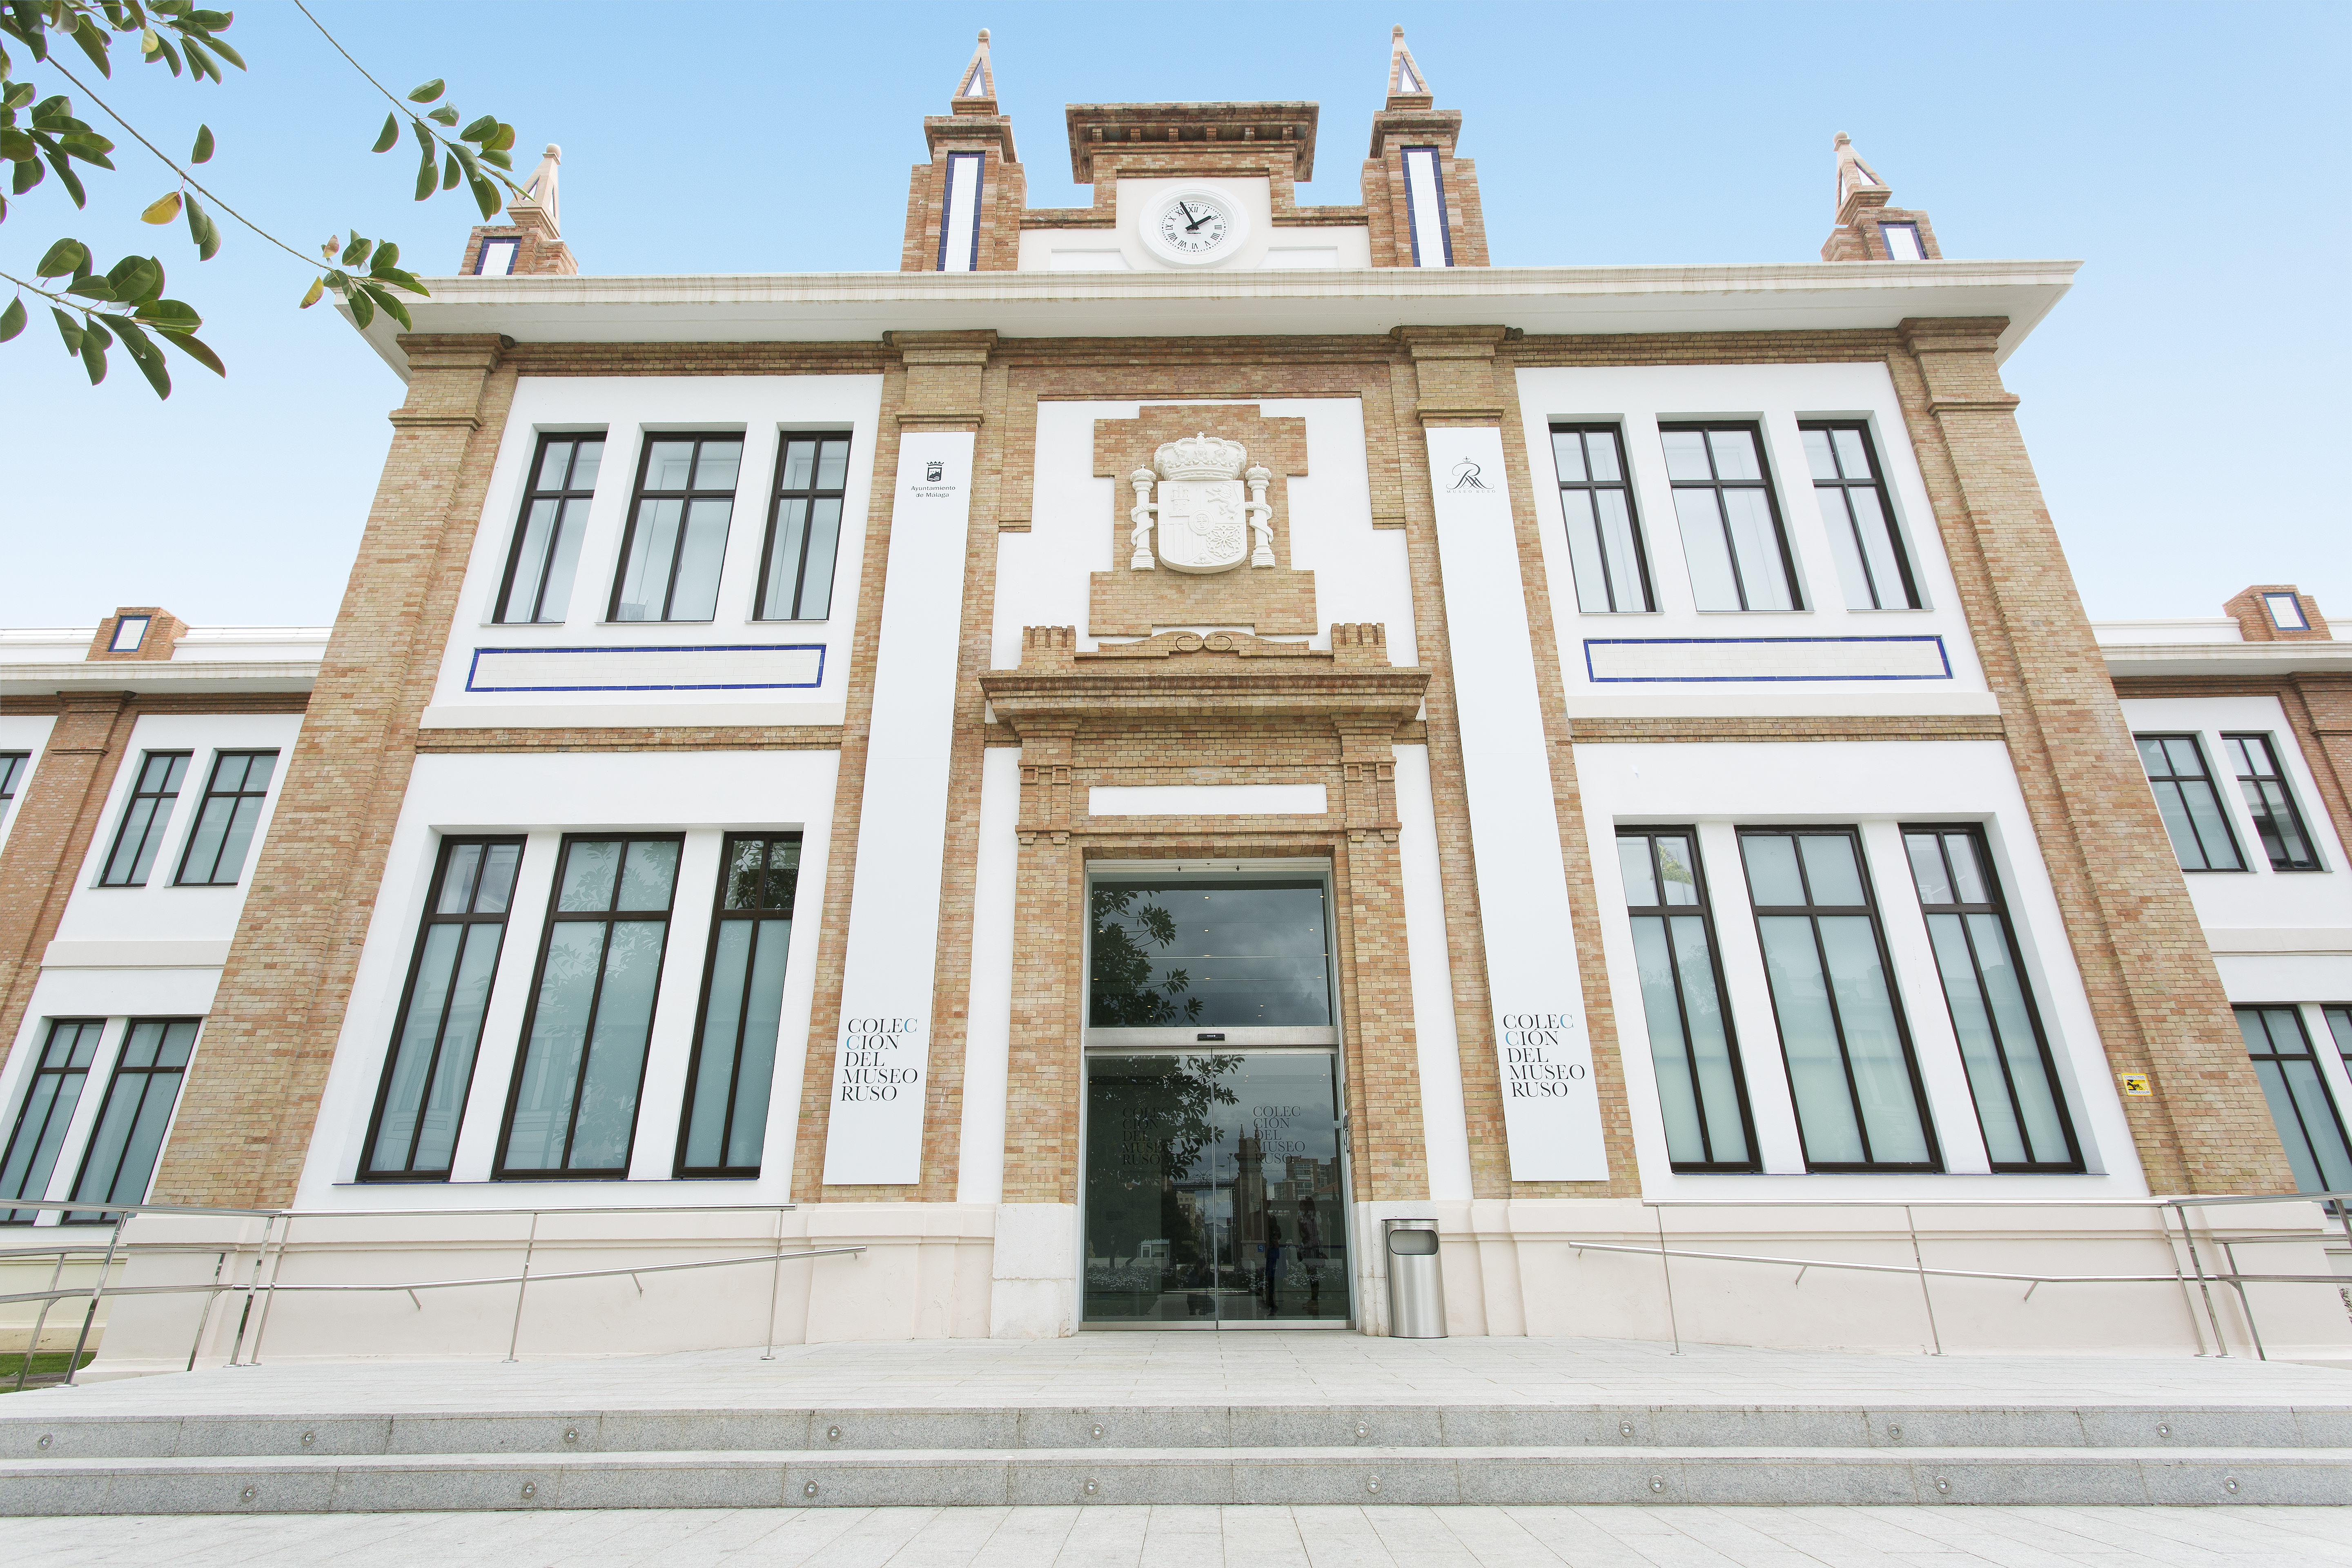 The Russian Museum of Malaga is one of the most digitized.